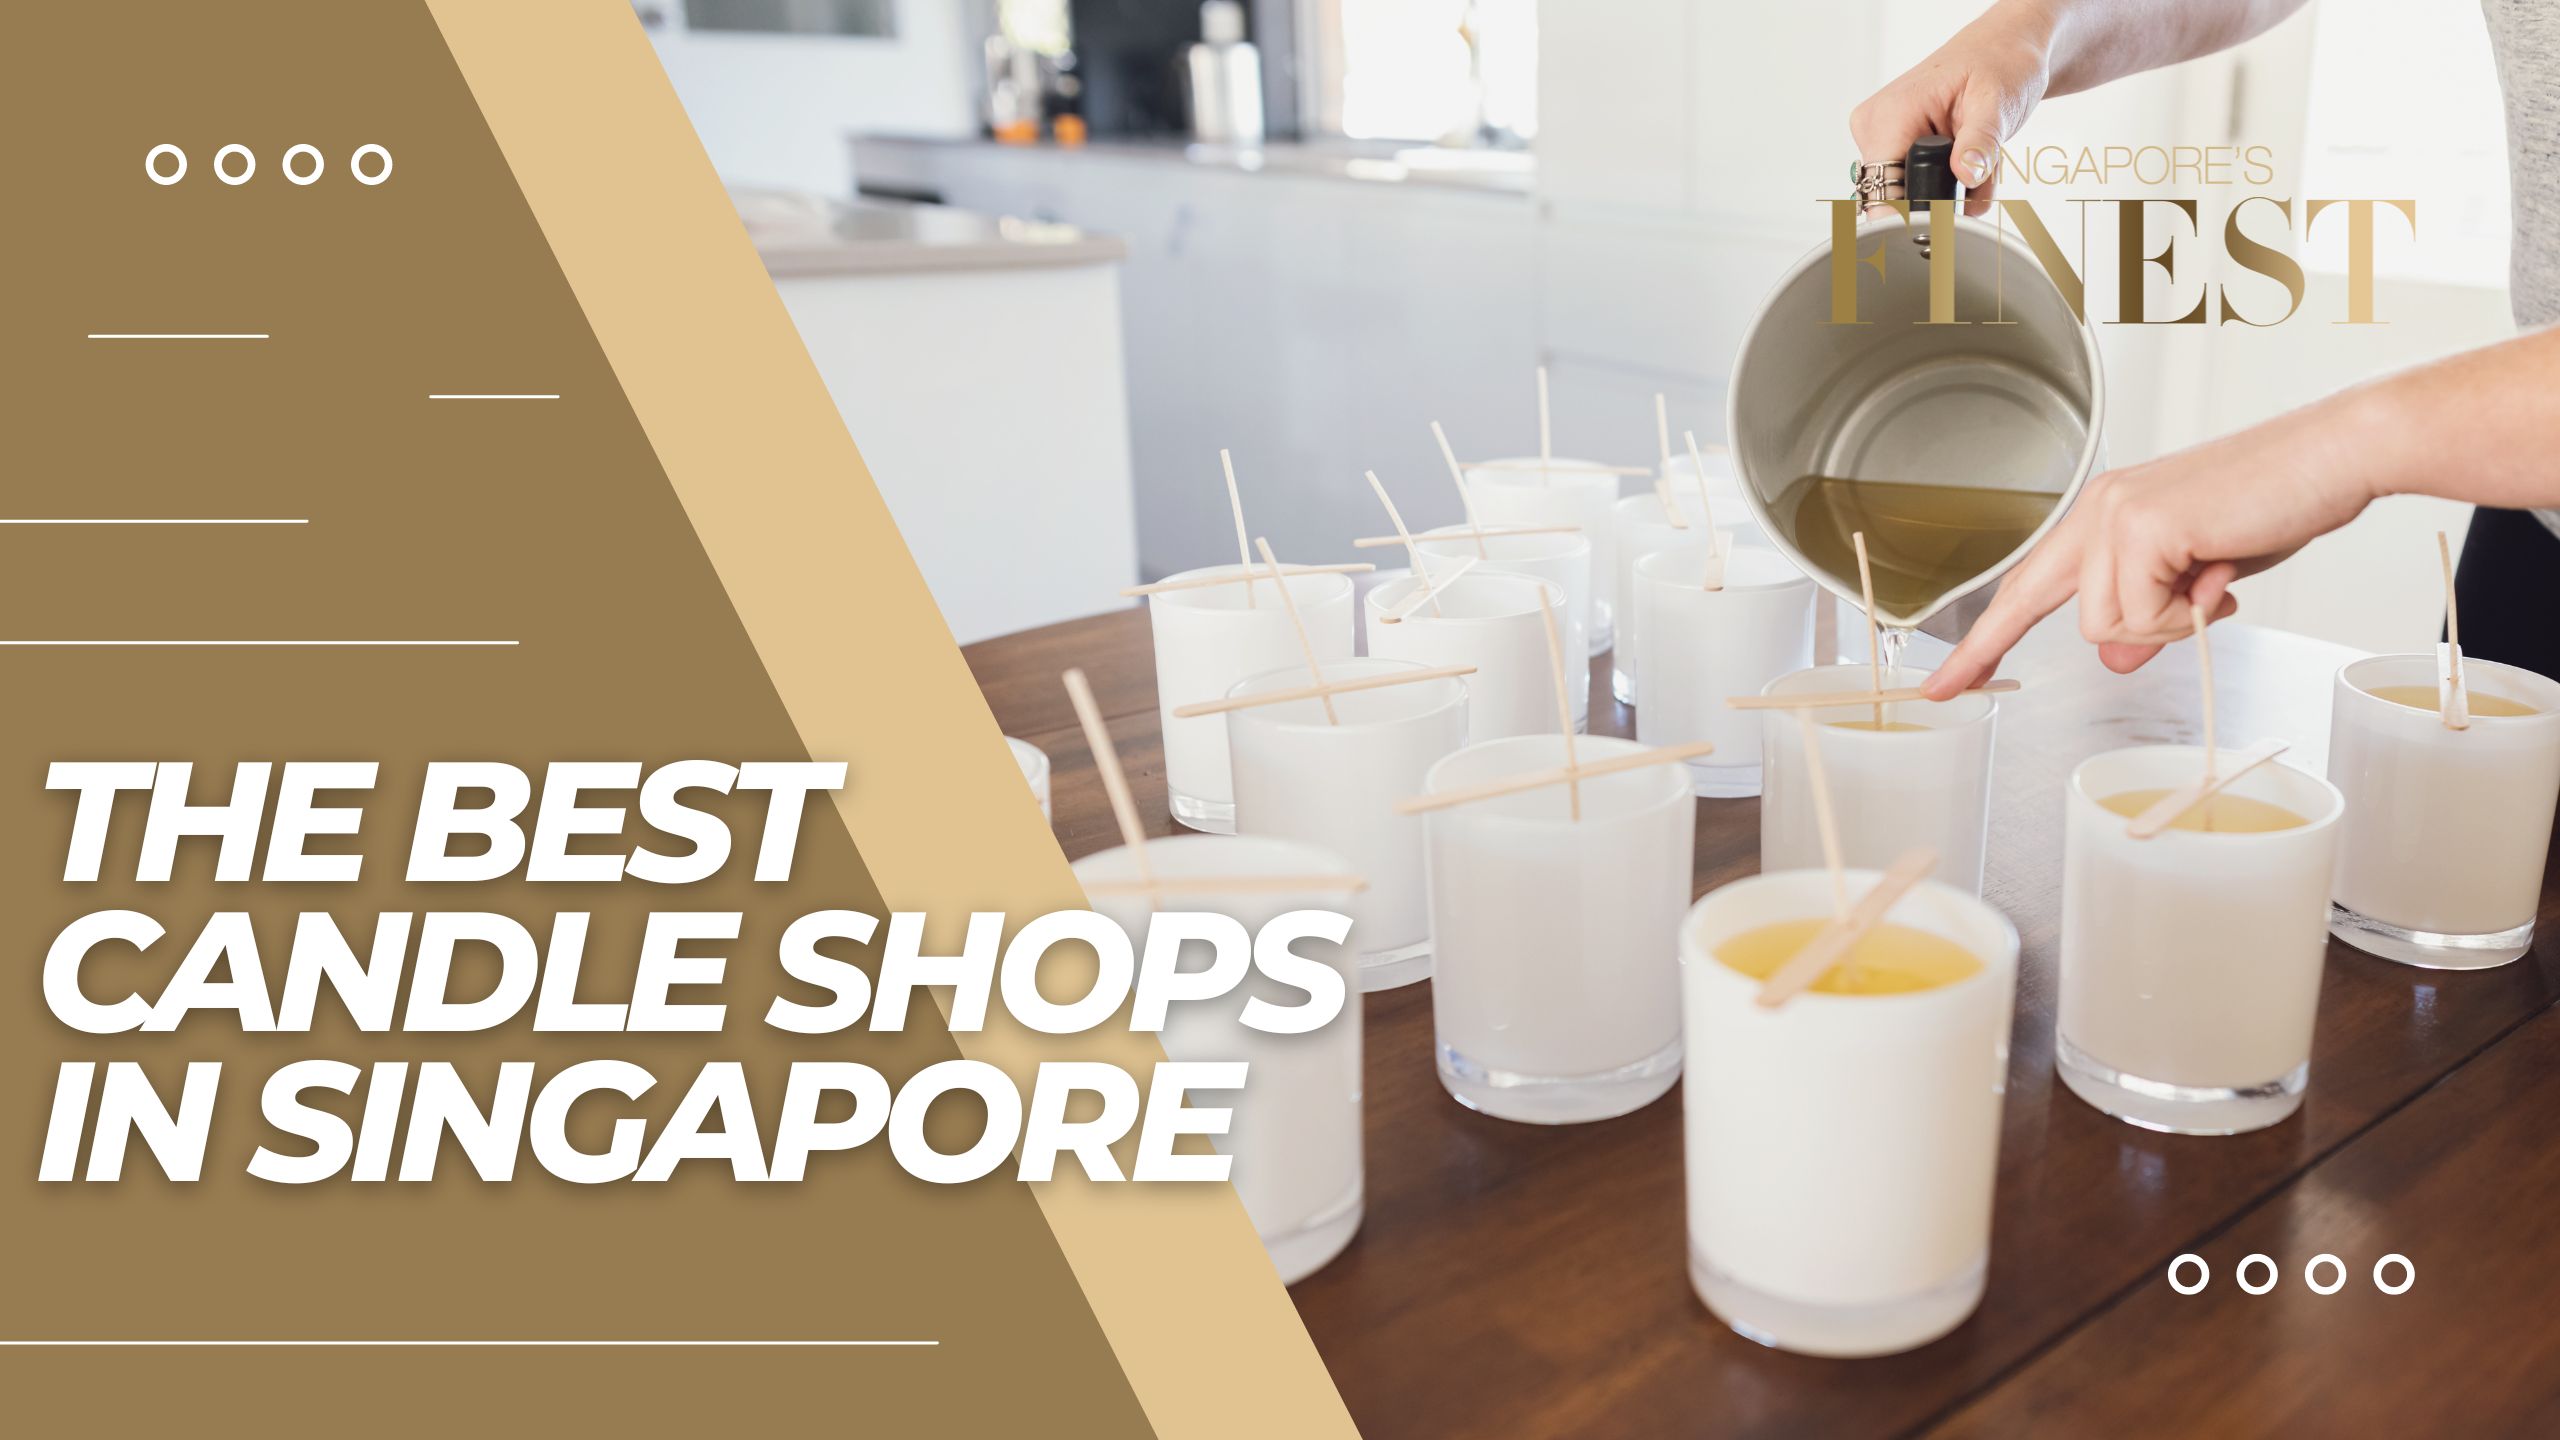 The Finest Candle Shops in Singapore